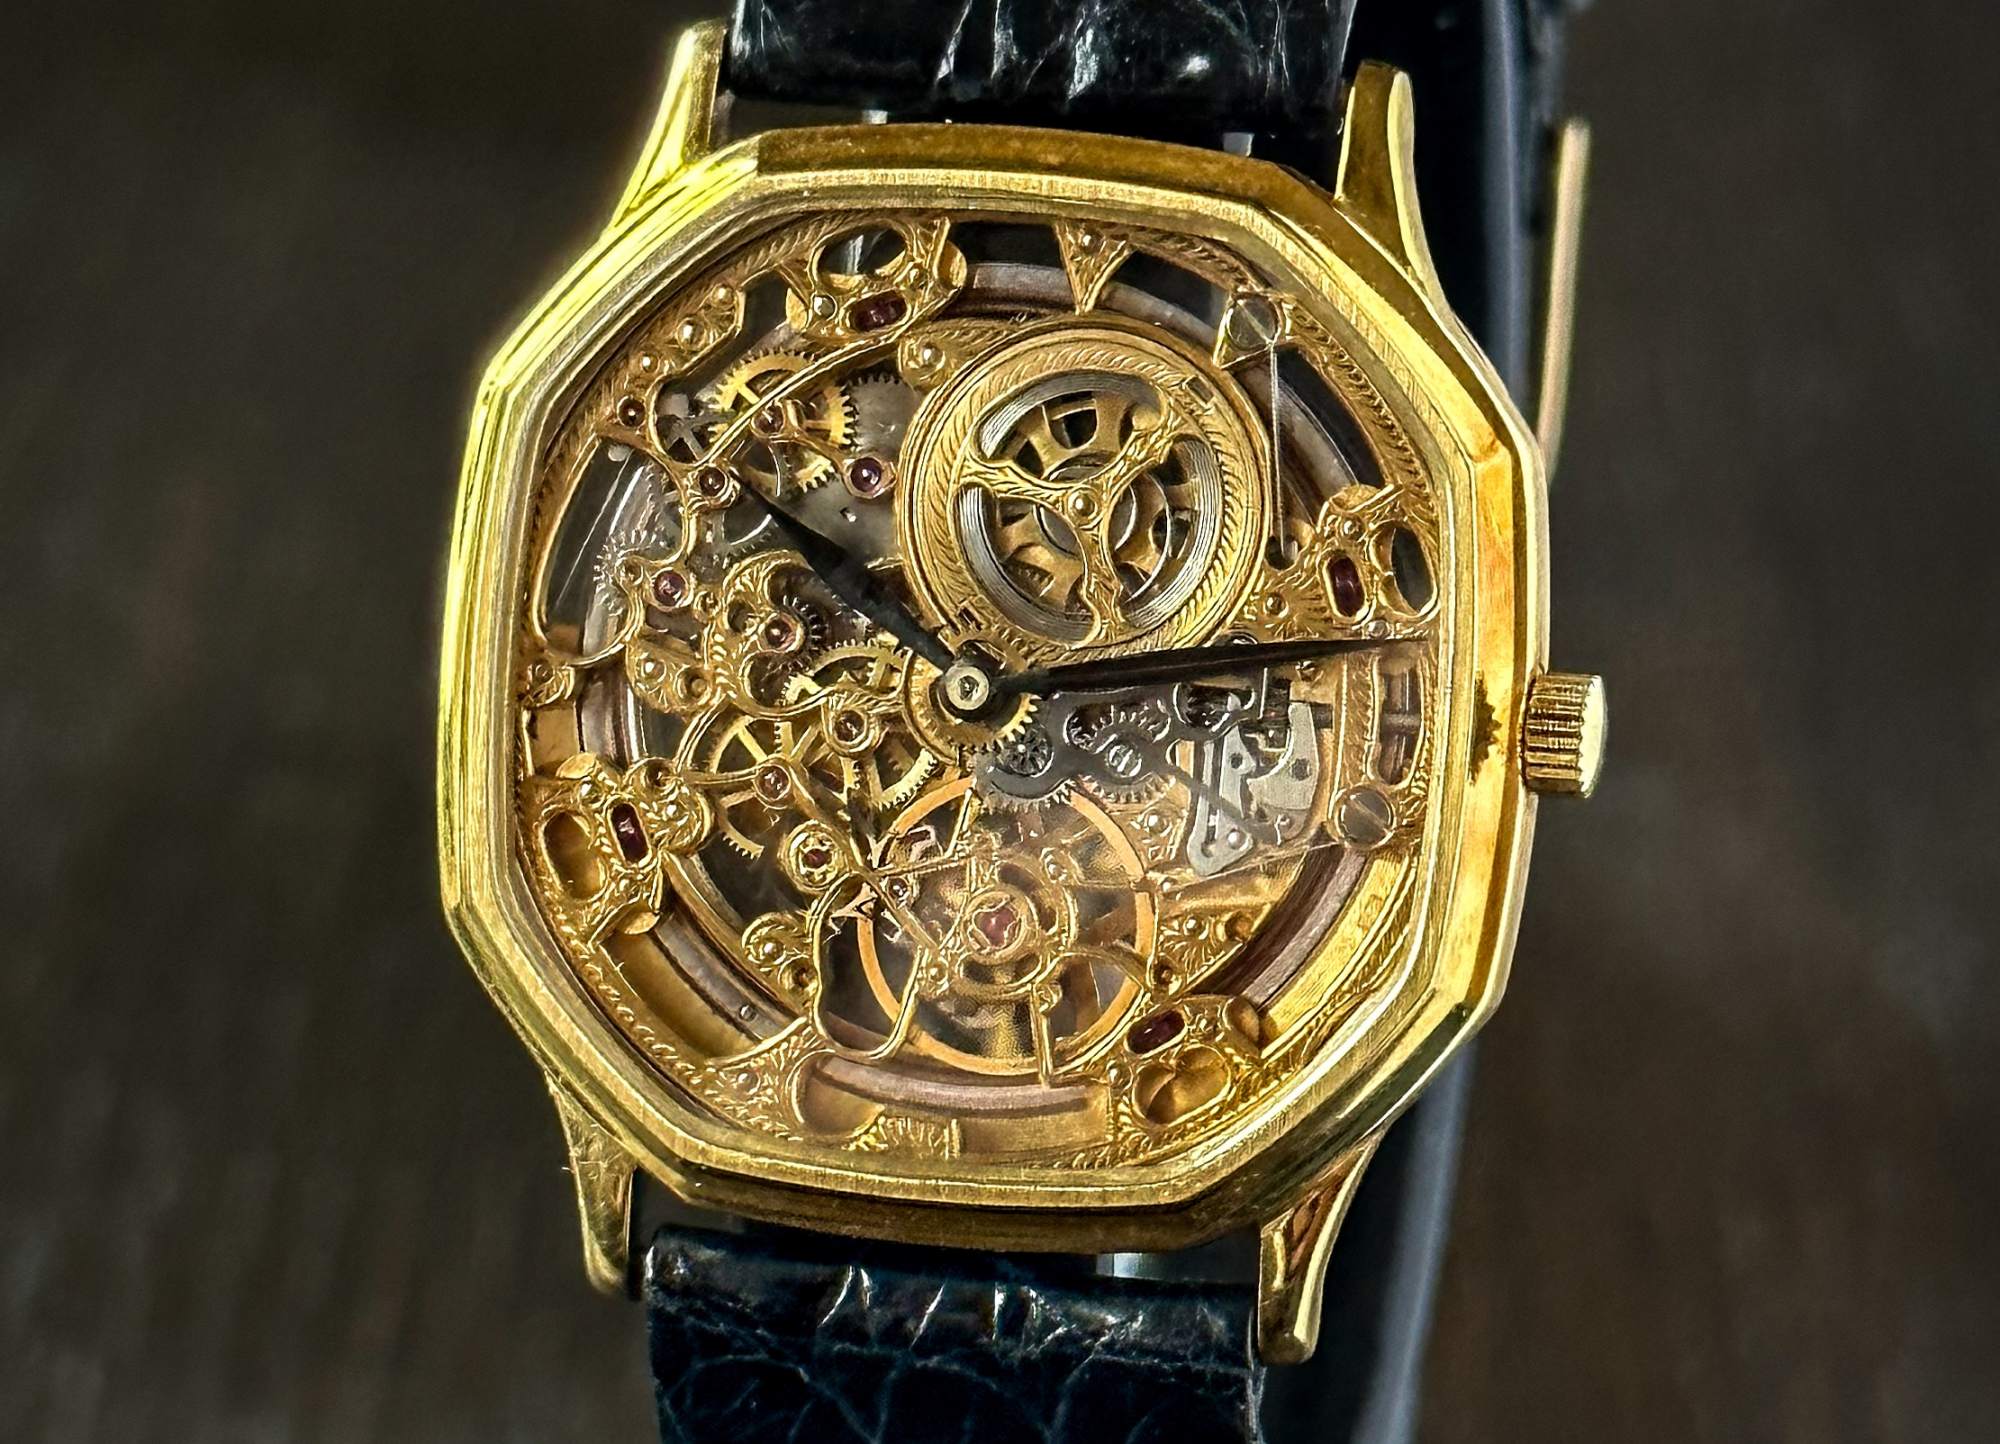 The Audemars Piguet Skeleton BA4266P002 is an intriguing vintage piece that demonstrates the brand’s history and craftmanship